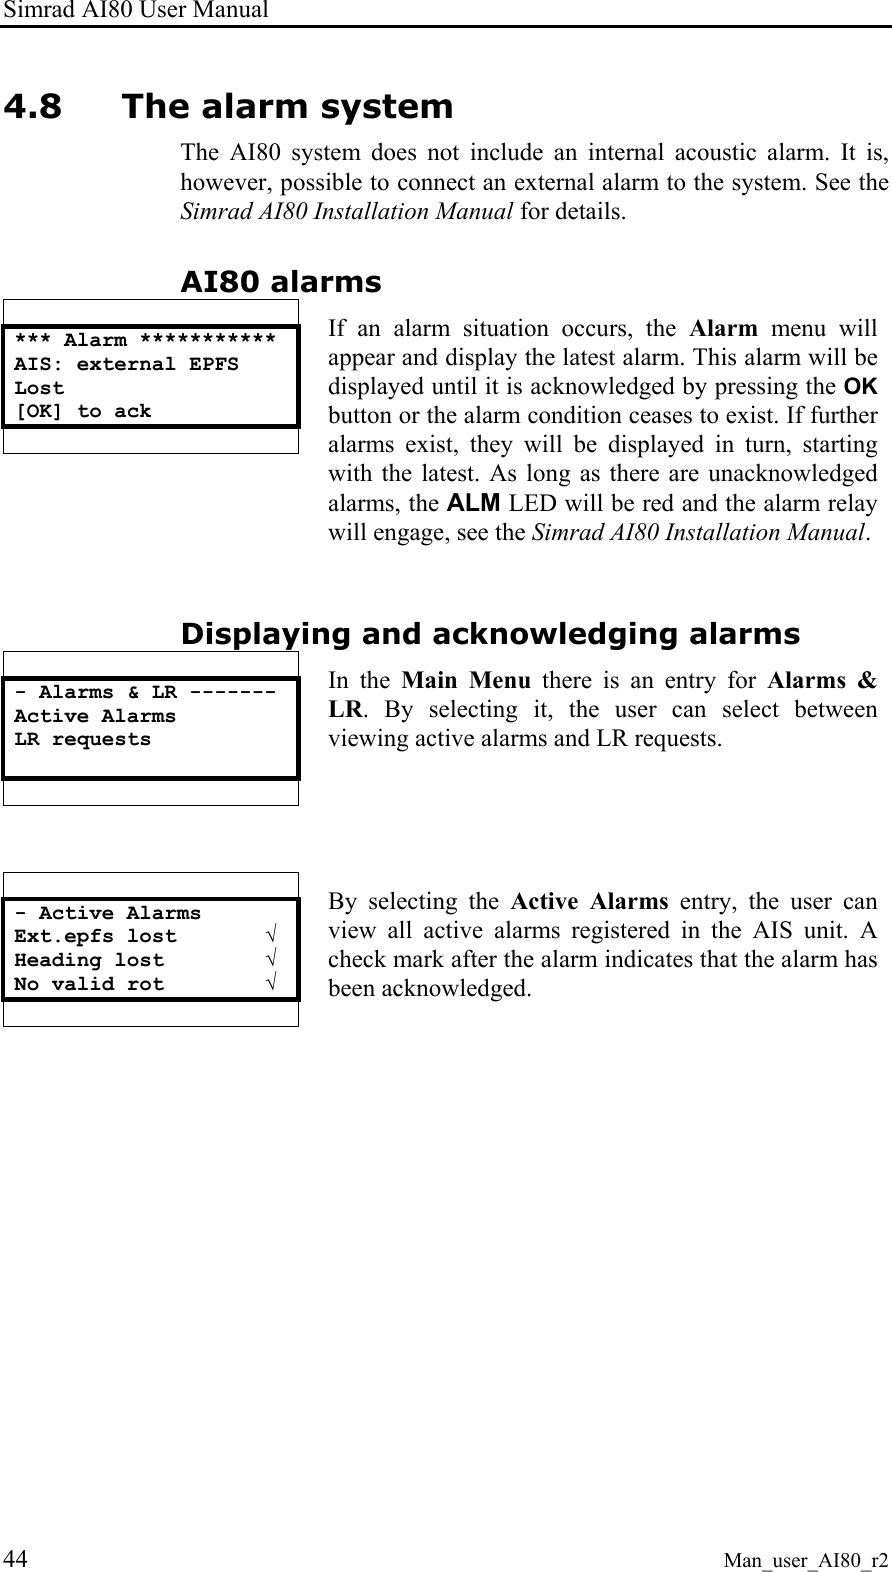 Simrad AI80 User Manual 44 Man_user_AI80_r2 4.8 The alarm system The AI80 system does not include an internal acoustic alarm. It is, however, possible to connect an external alarm to the system. See the Simrad AI80 Installation Manual for details. AI80 alarms  *** Alarm *********** AIS: external EPFS Lost [OK] to ack    If an alarm situation occurs, the Alarm menu will appear and display the latest alarm. This alarm will be displayed until it is acknowledged by pressing the OK button or the alarm condition ceases to exist. If further alarms exist, they will be displayed in turn, starting with the latest. As long as there are unacknowledged alarms, the ALM LED will be red and the alarm relay will engage, see the Simrad AI80 Installation Manual. Displaying and acknowledging alarms  - Alarms &amp; LR ------- Active Alarms LR requests    In the Main Menu there is an entry for Alarms &amp; LR. By selecting it, the user can select between viewing active alarms and LR requests.   - Active Alarms Ext.epfs lost       √ Heading lost        √ No valid rot        √   By selecting the Active Alarms entry, the user can view all active alarms registered in the AIS unit. A check mark after the alarm indicates that the alarm has been acknowledged.  